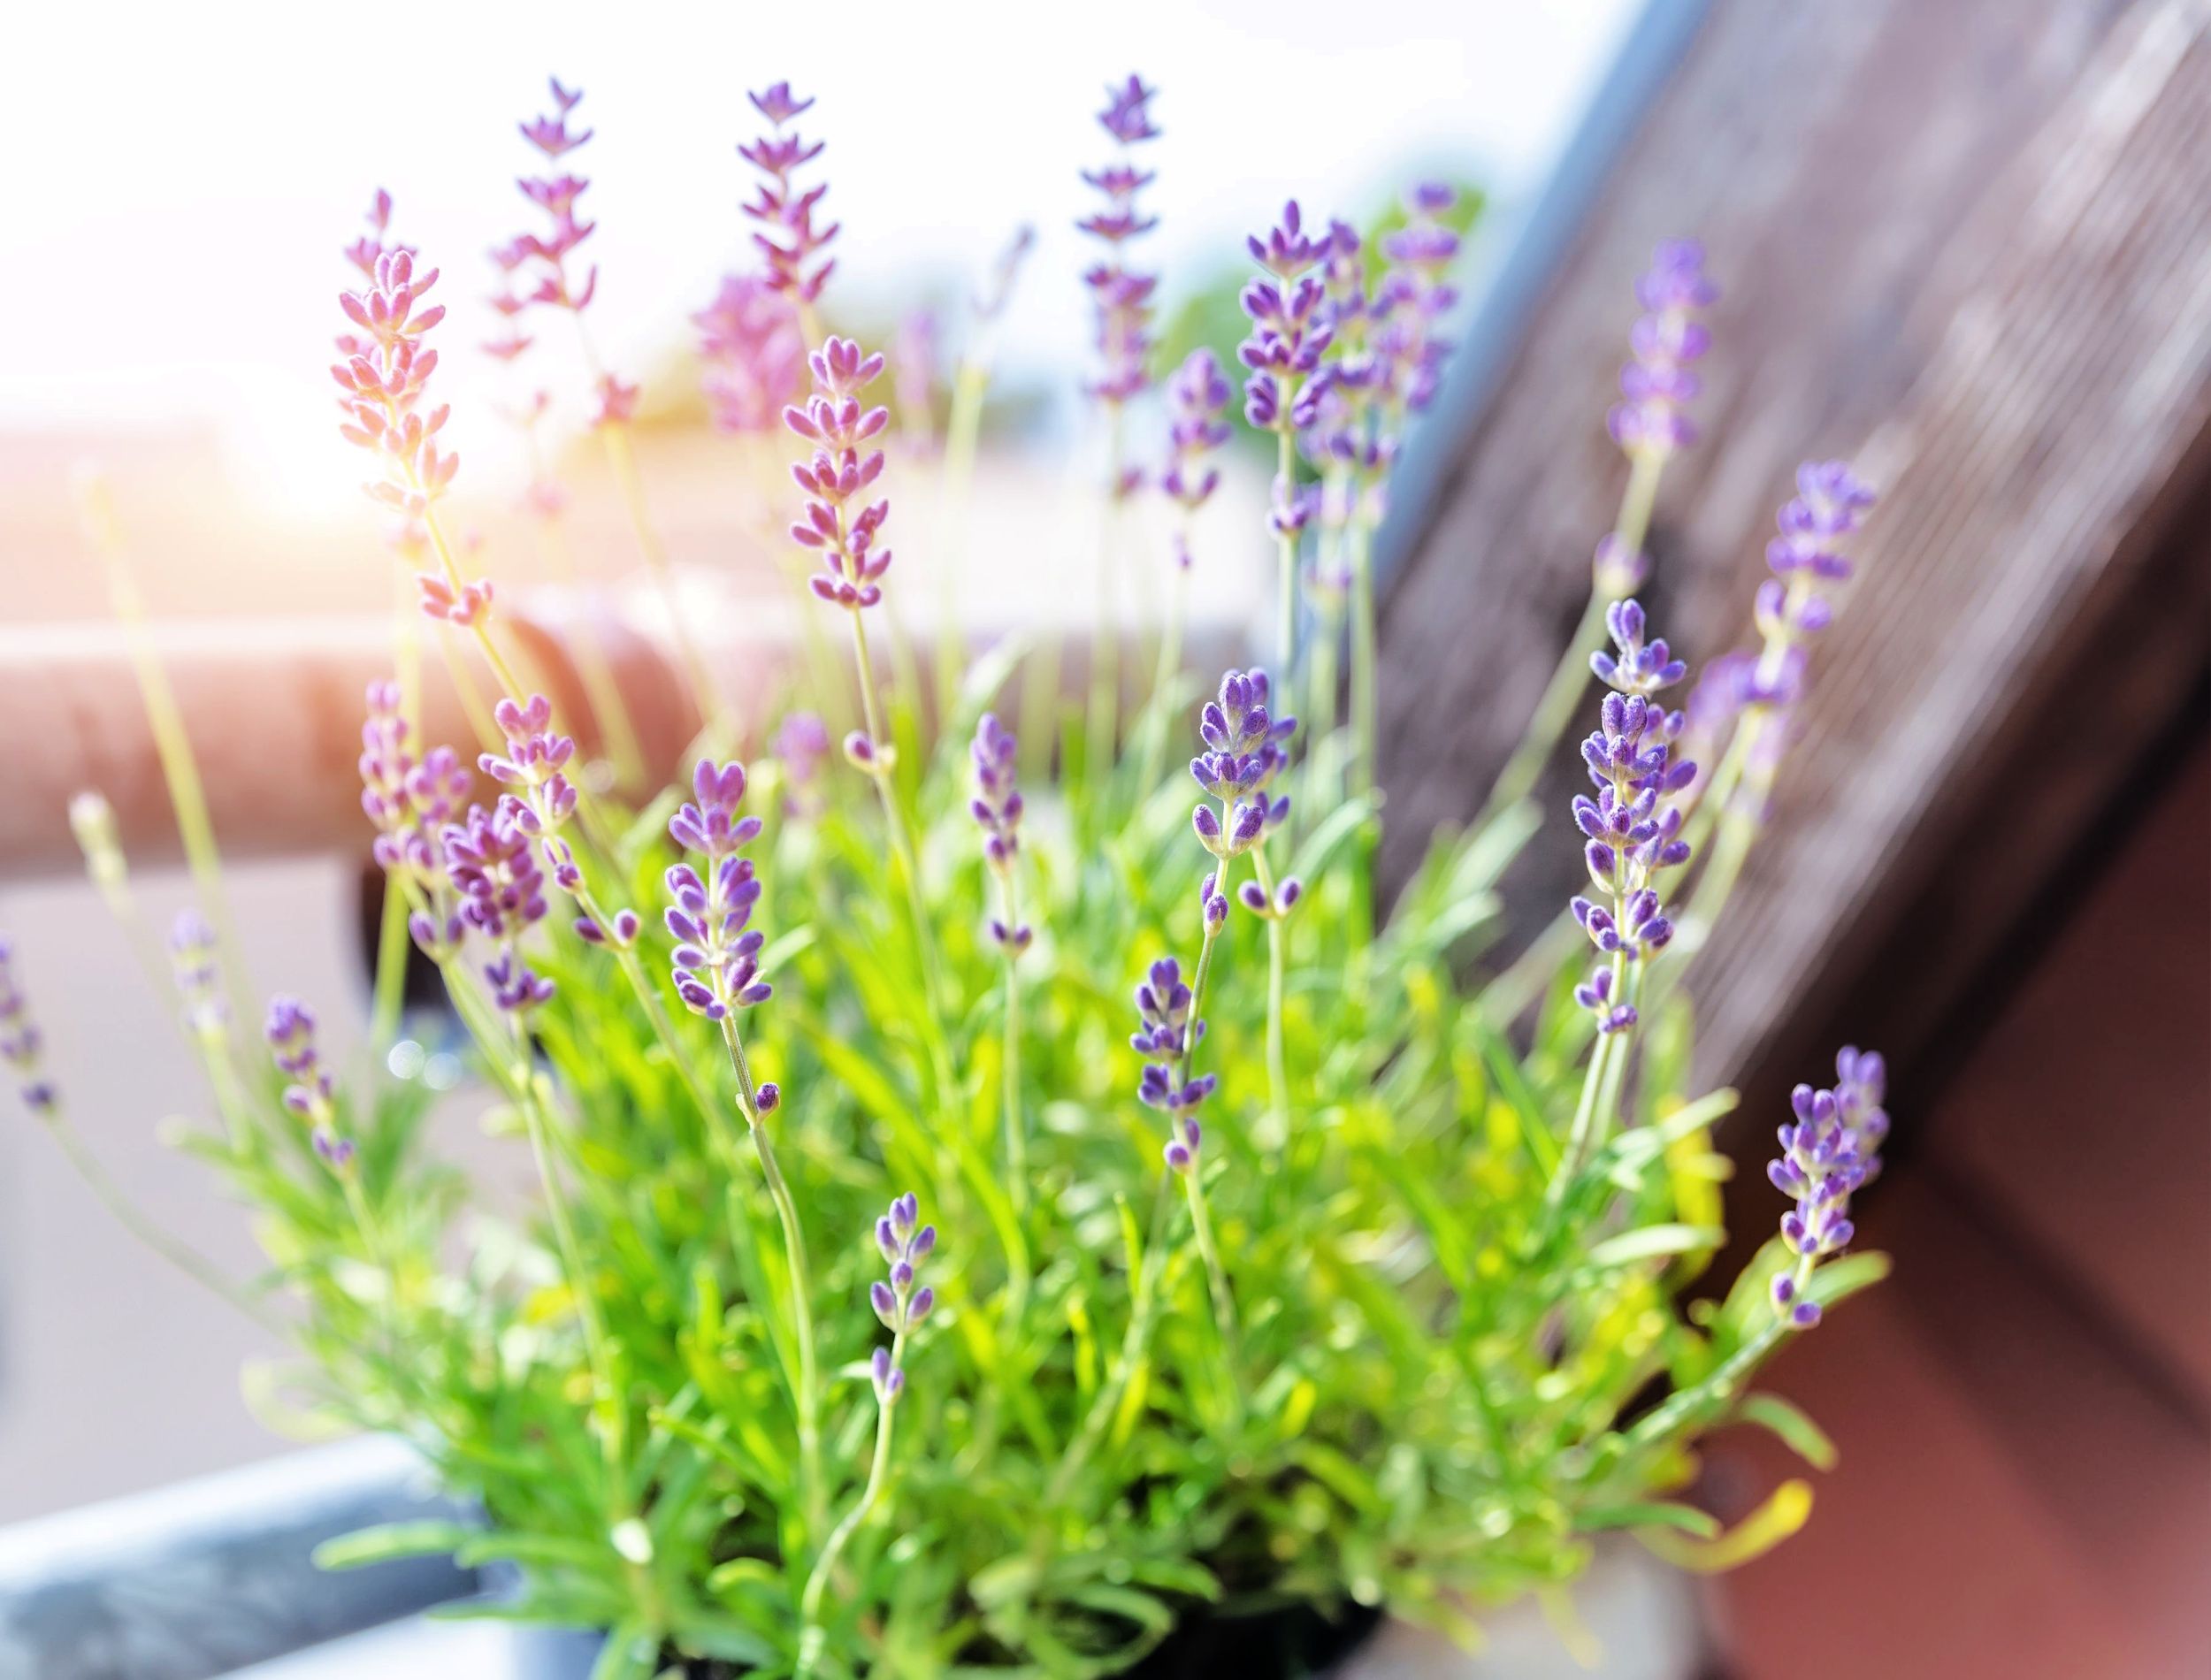 Close-up detail hanged metal bucket pot with green purple lilac fresh aromatic blooming lavender flowers growing apartment condo balcony rooftop terrace warm sunset light background. Home gardening.